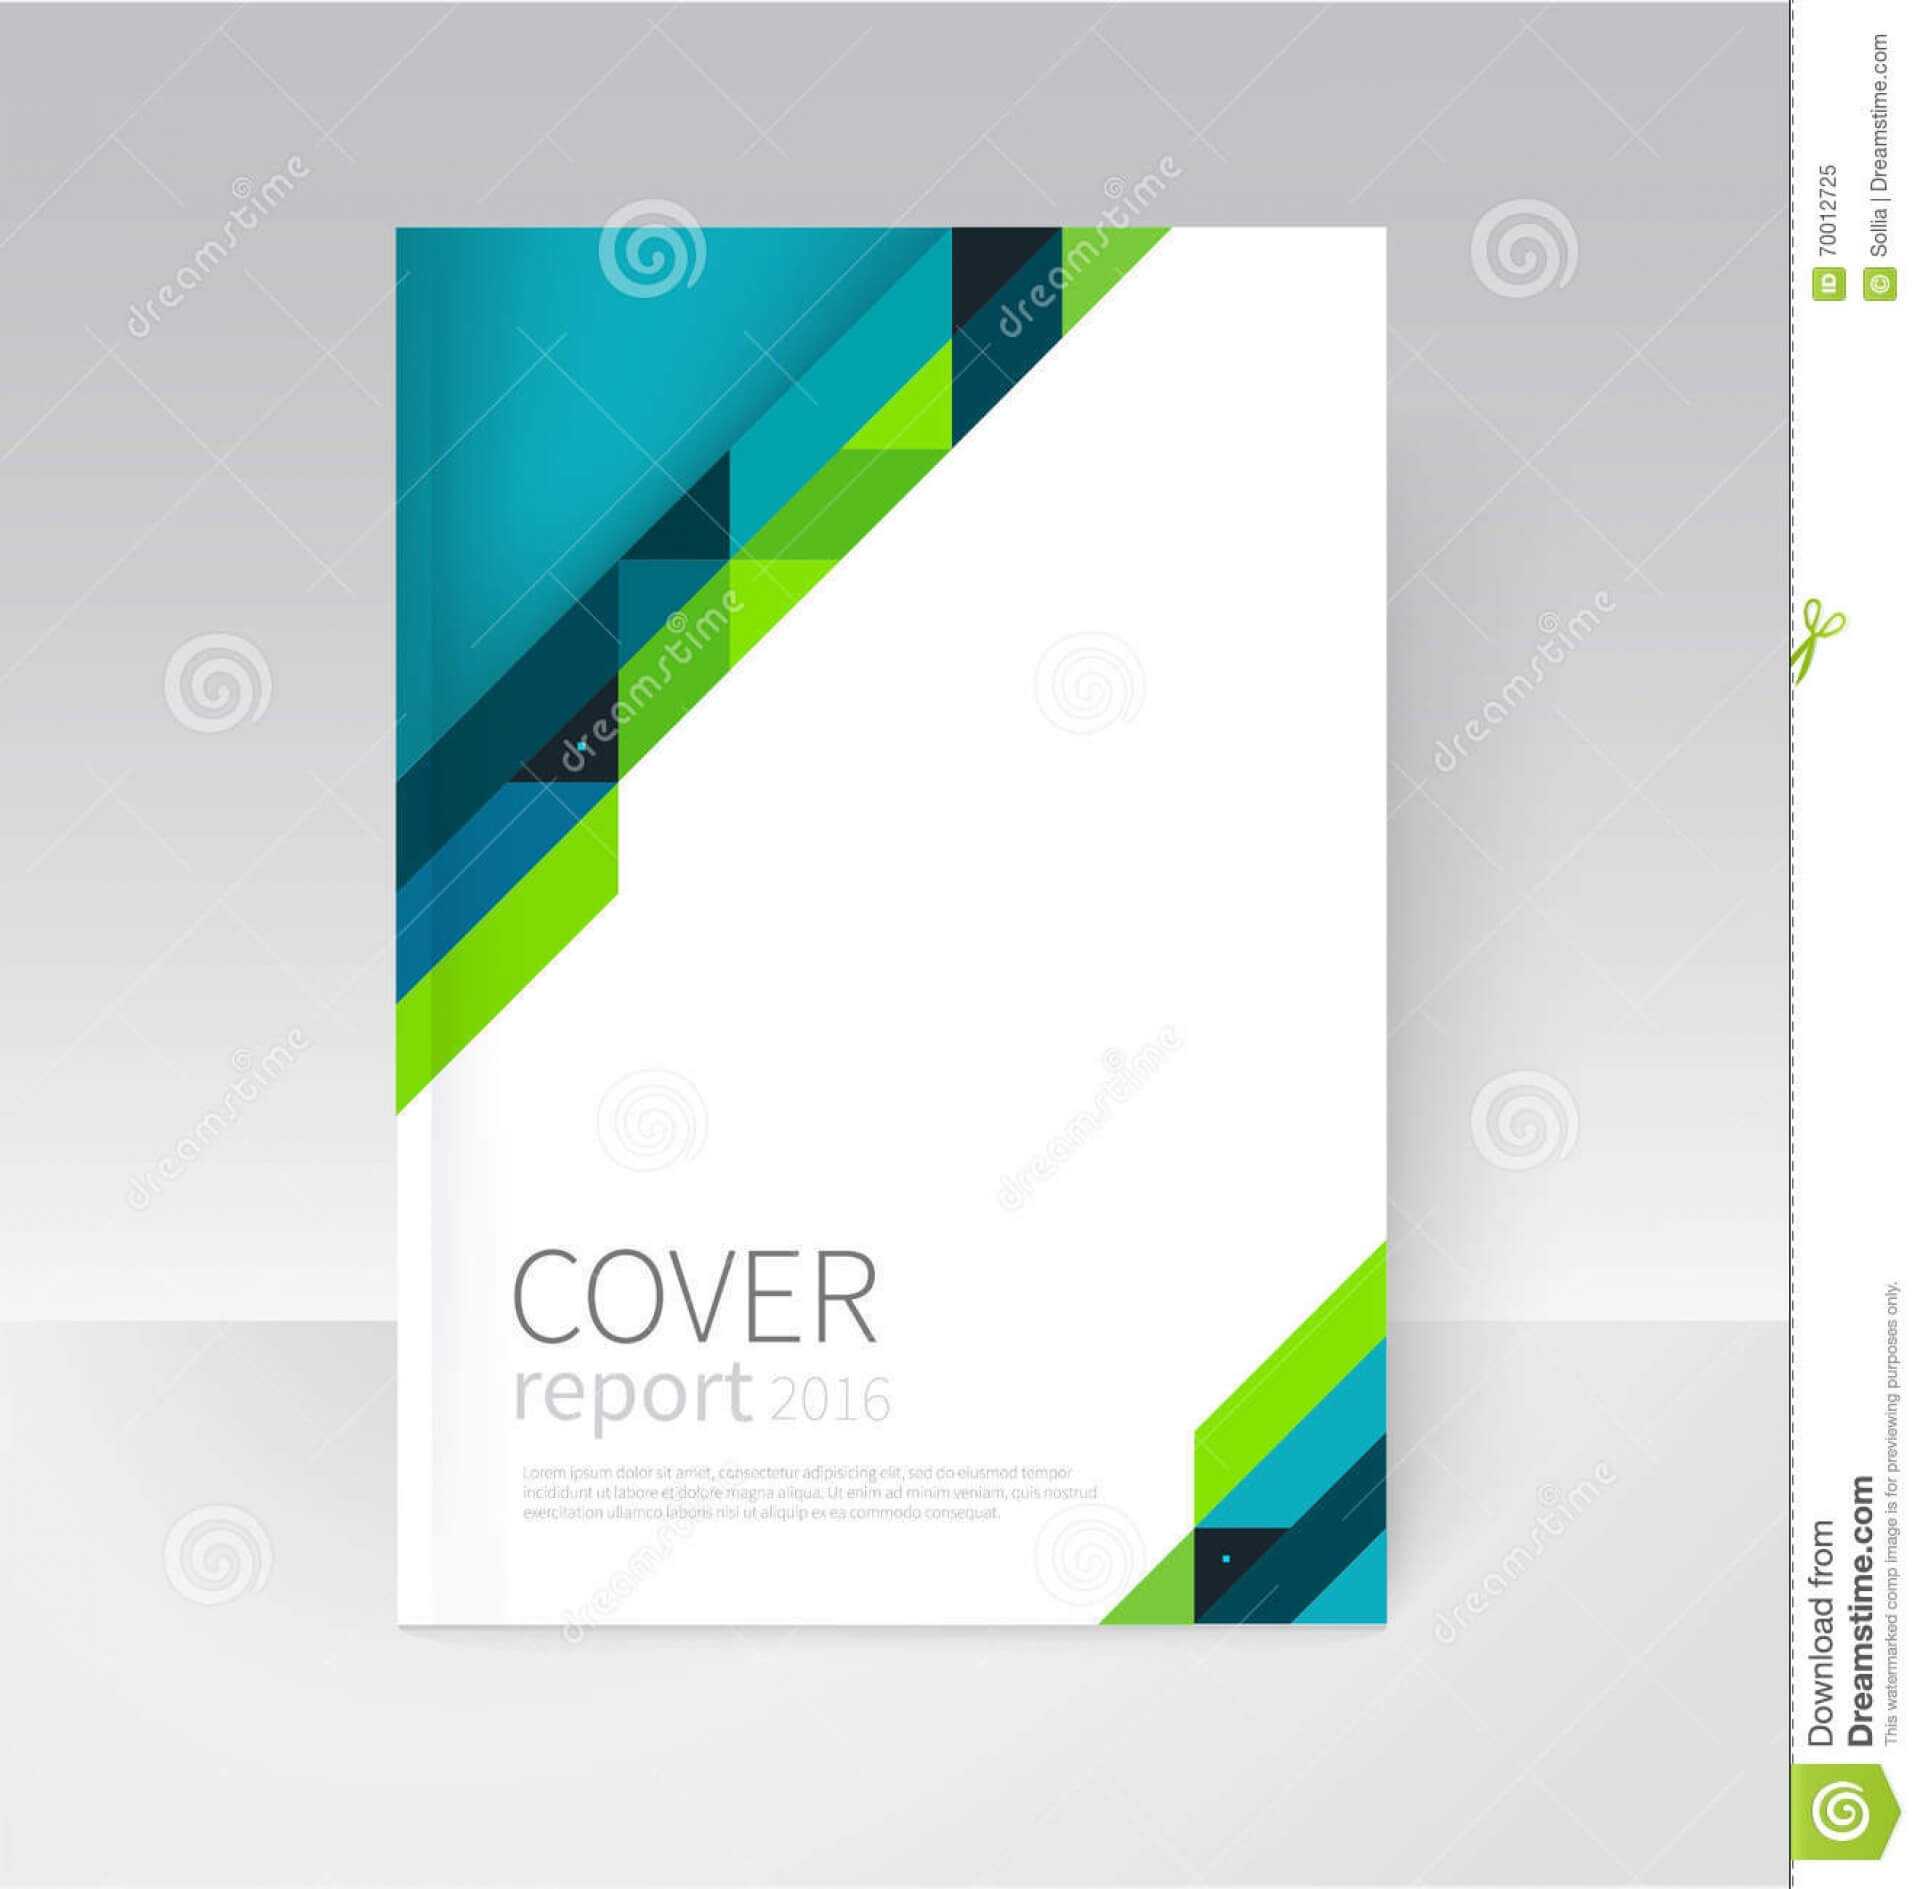 ms word cover page template free download